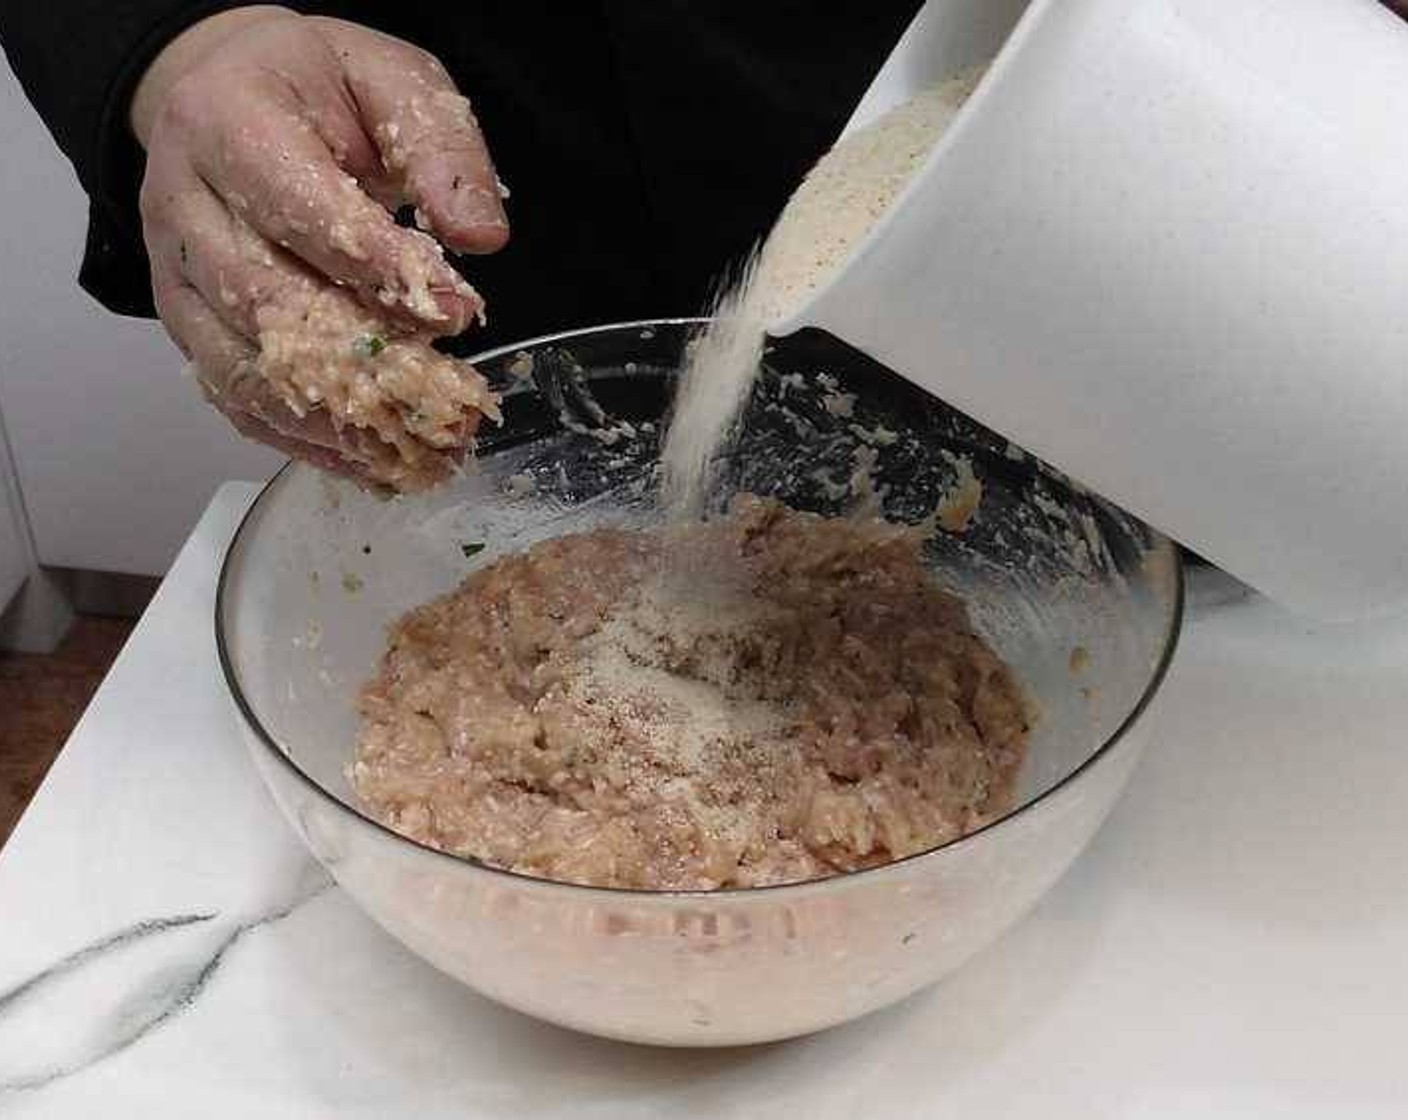 step 2 Once combined add around half a cup of Breadcrumbs (to taste) a little bit at a time to absorb the excess moisture. You don't want it to stick to your hands. Be careful not to add too much as then the burger will end up too dry.